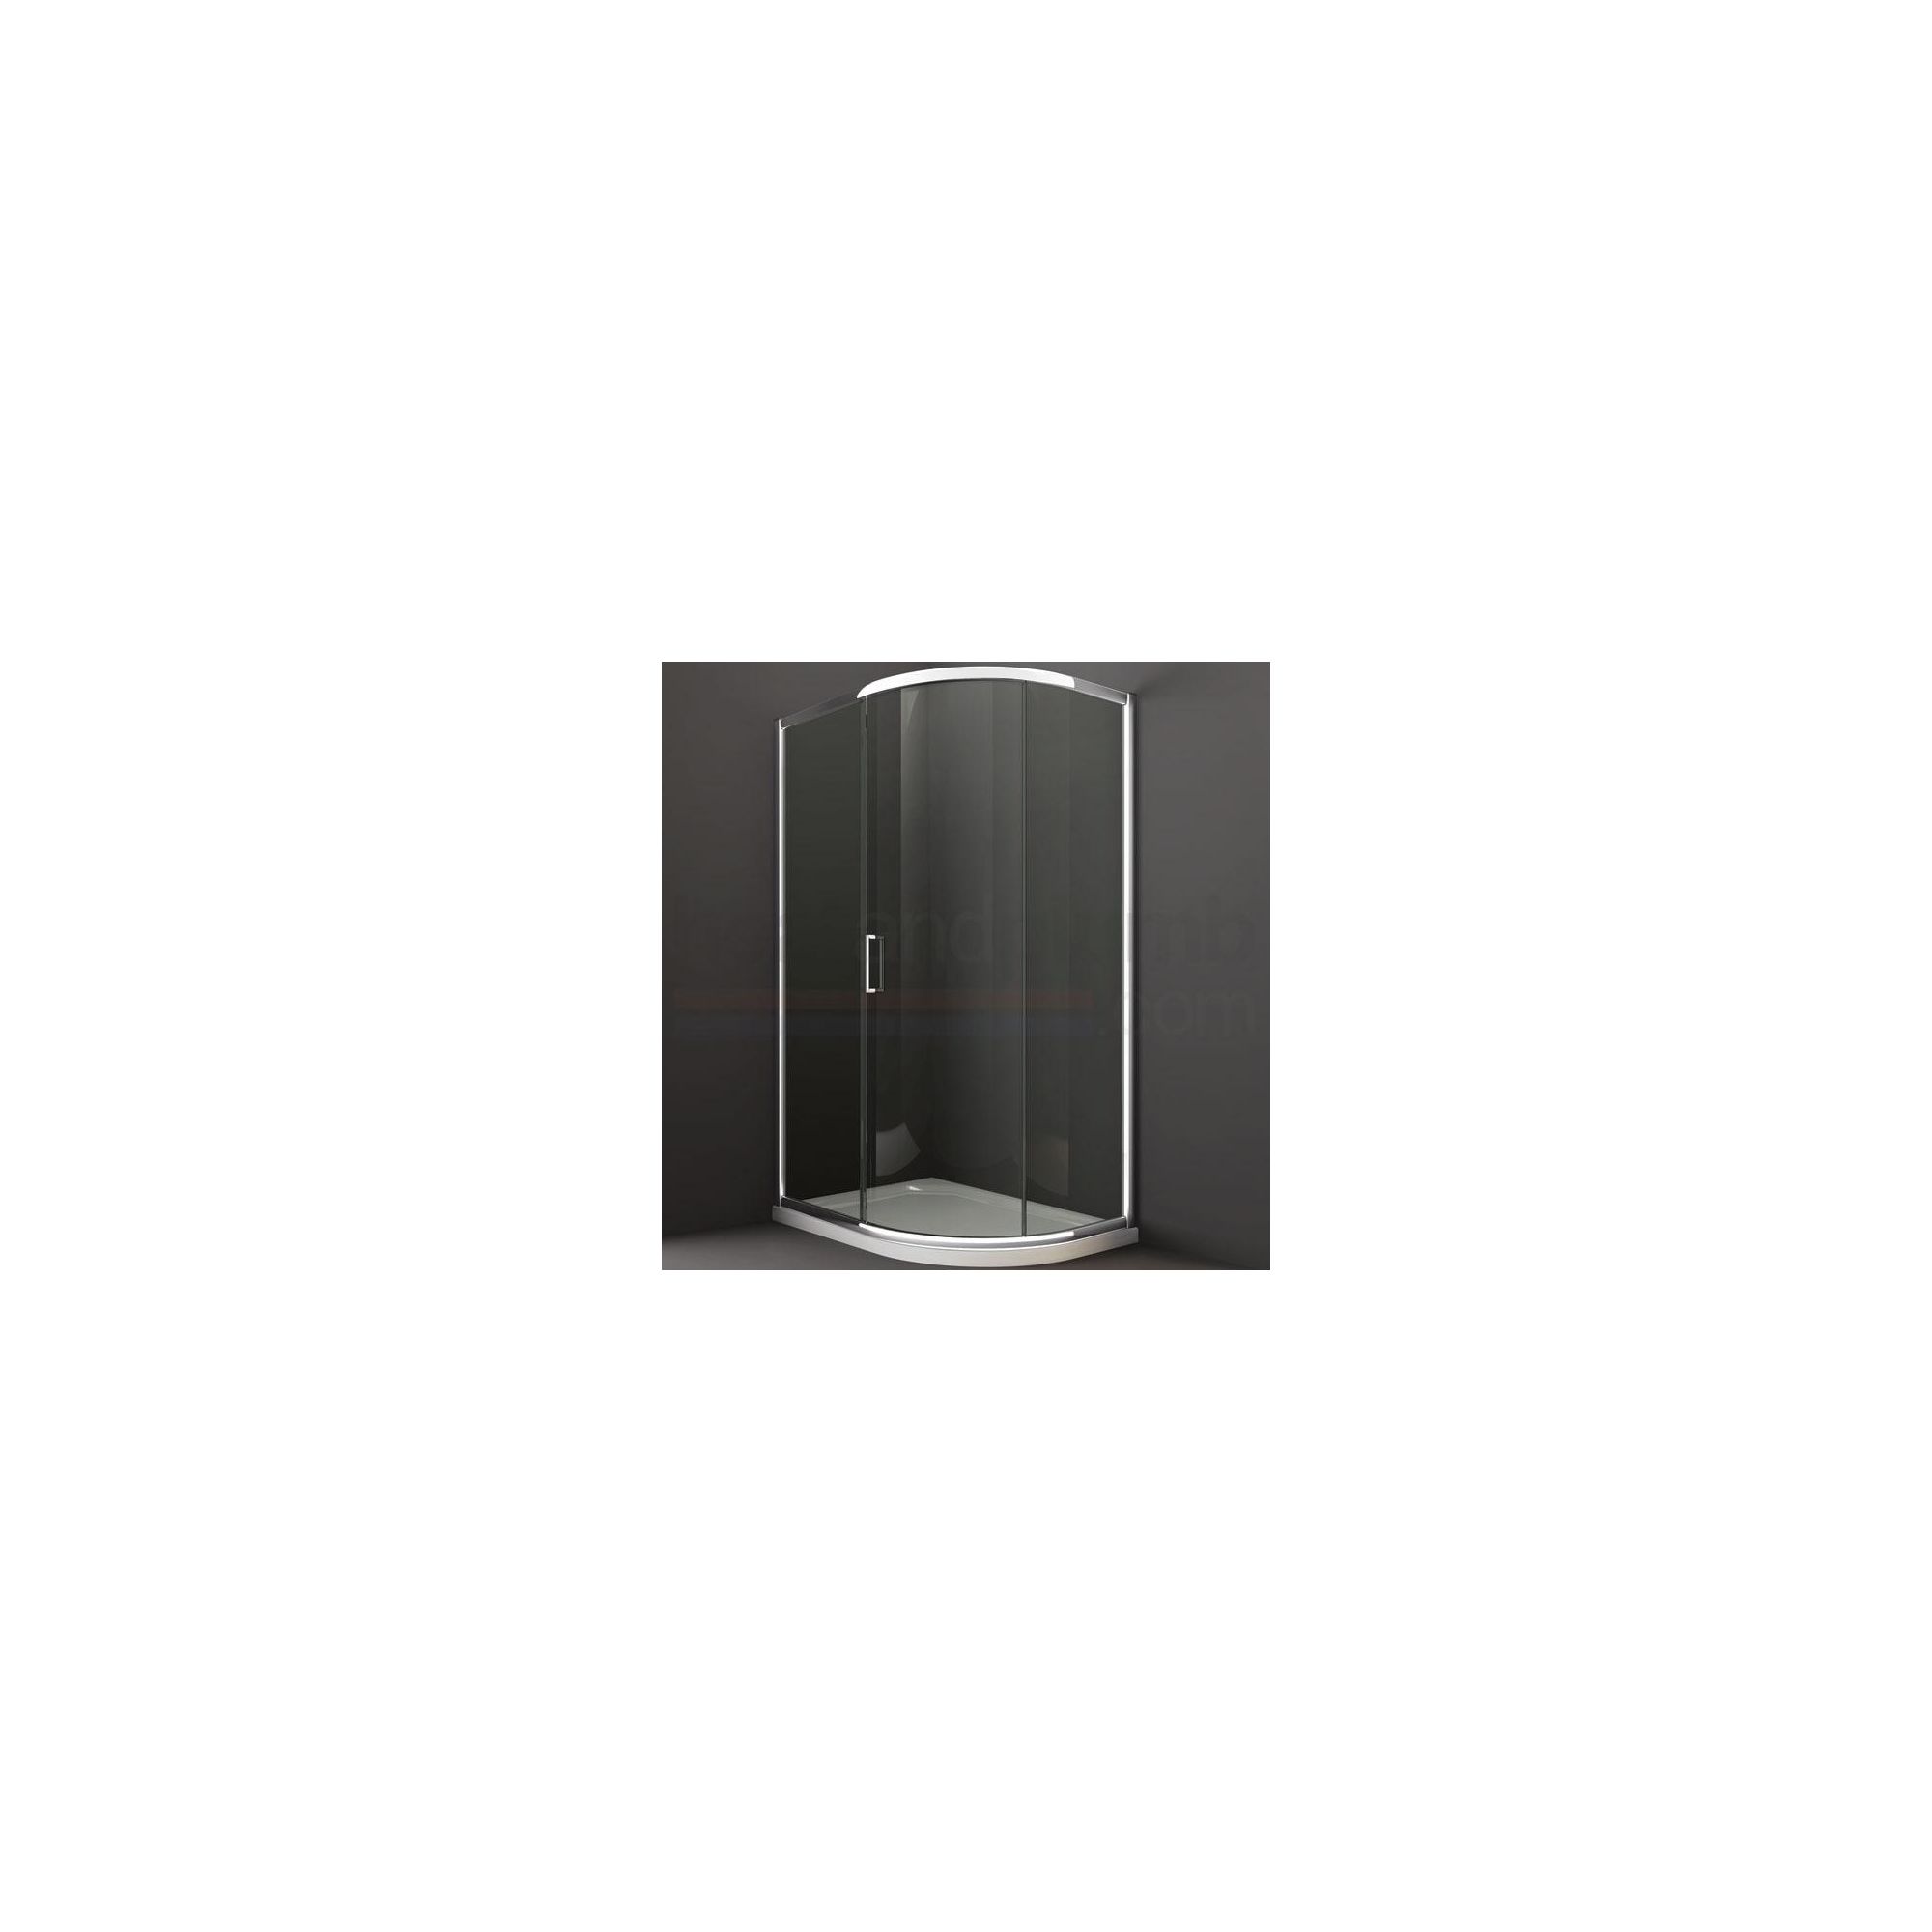 Merlyn Series 8 Sliding 1 Door Offset Quadrant Shower Enclosure, 1200mm x 800mm, Low Profile Tray, 8mm Glass at Tesco Direct